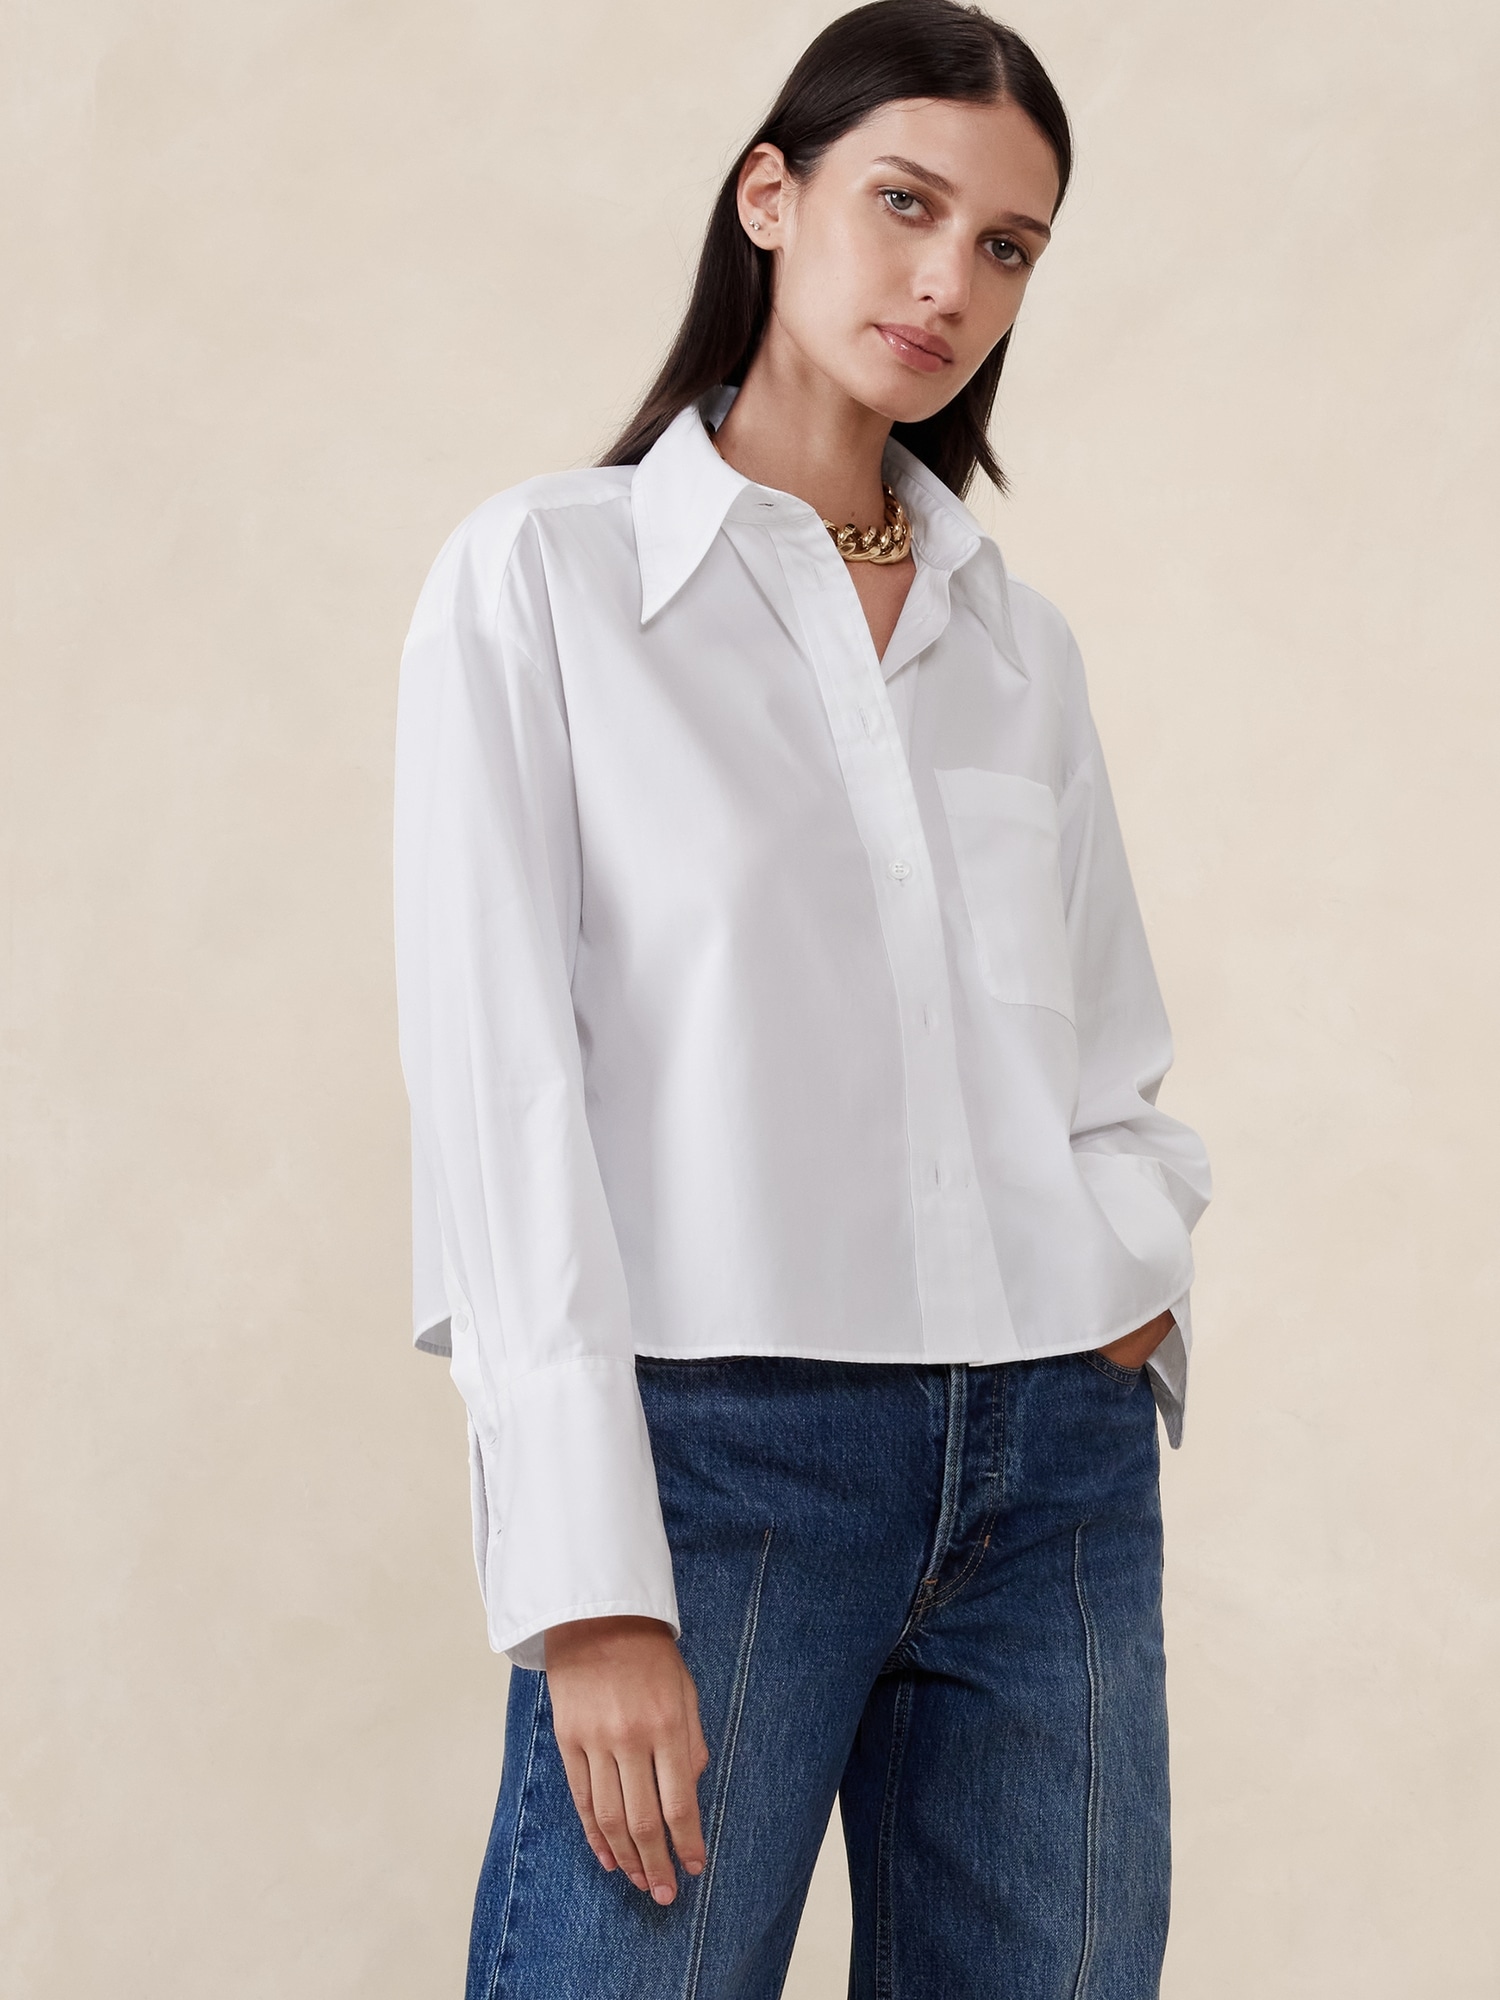 Banana Republic Factory + Active Support Cropped Top